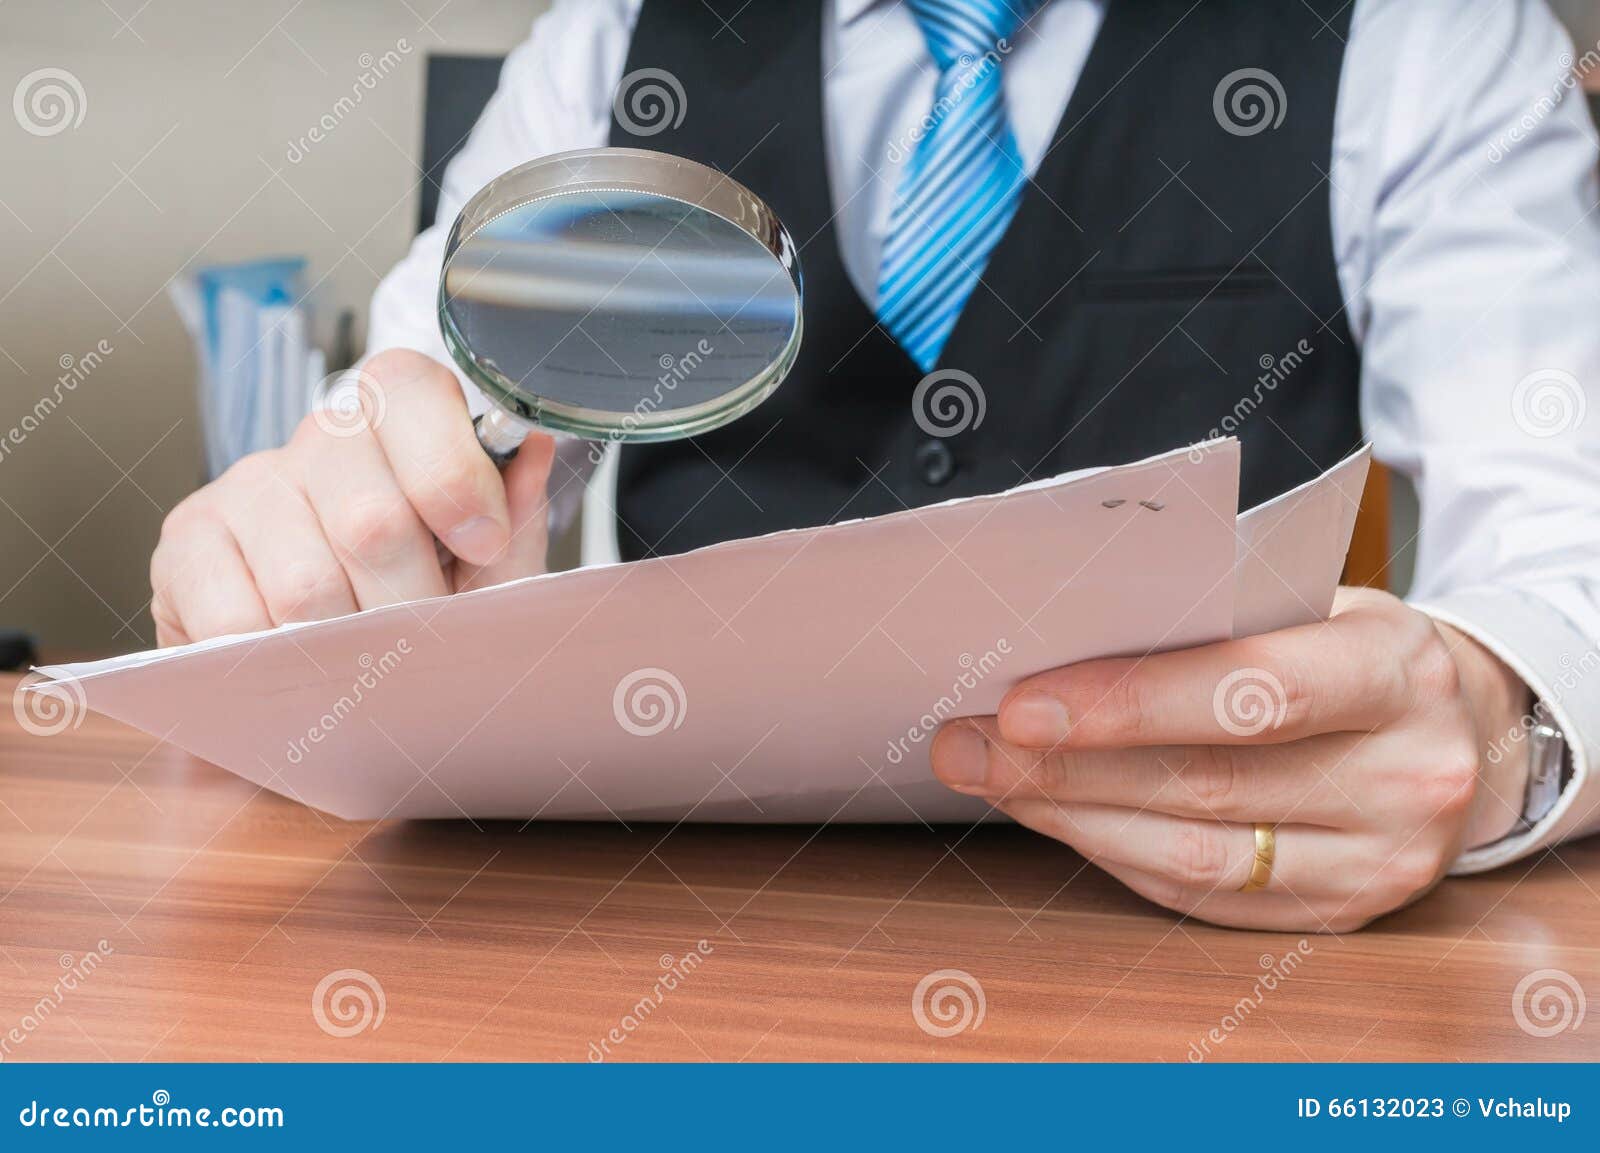 laywer is analysing document with magnifying glass